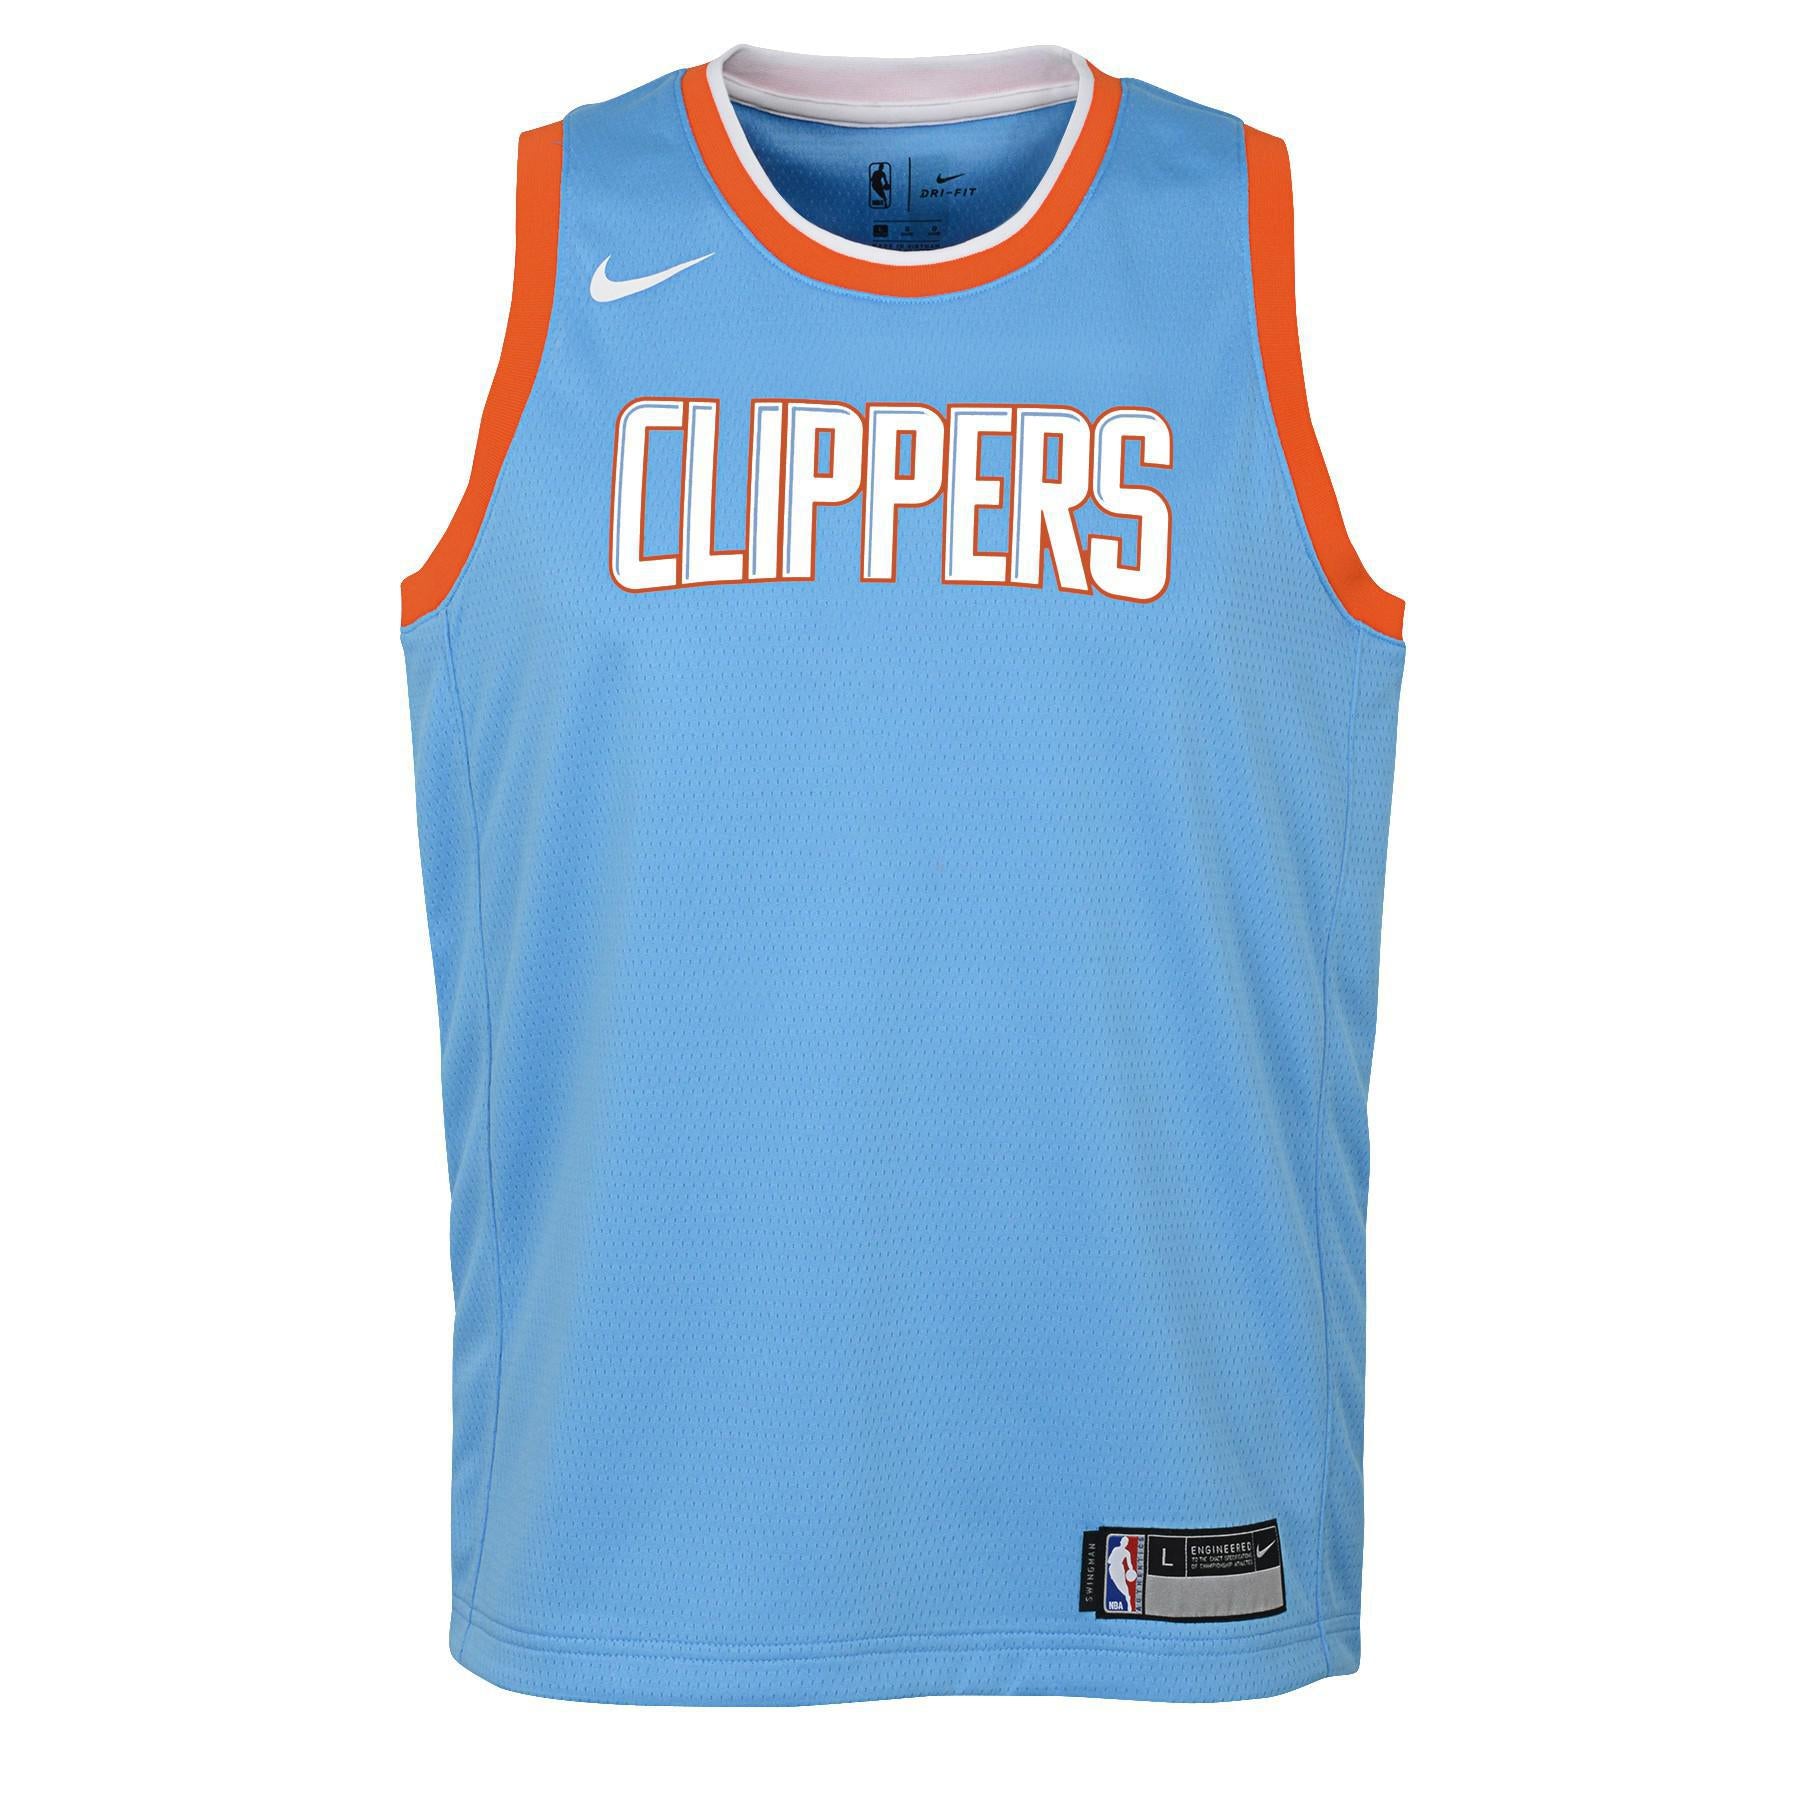 Order your Los Angeles Clippers Nike City Edition gear today